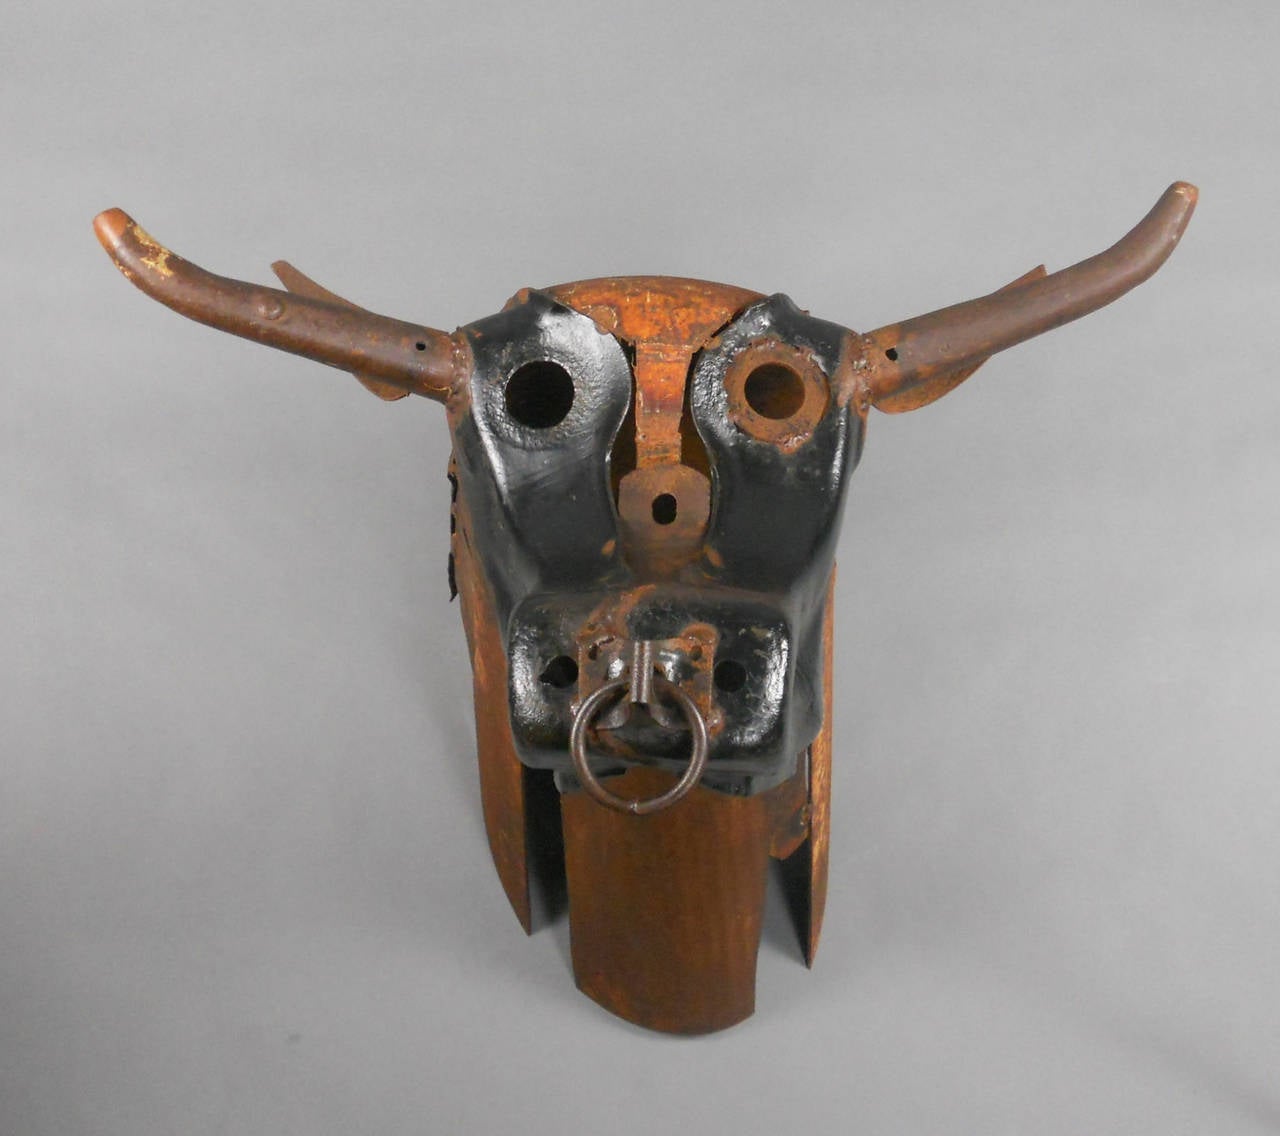 Canadian Metal Sculpture of a Bull's Head by Jim Hamm